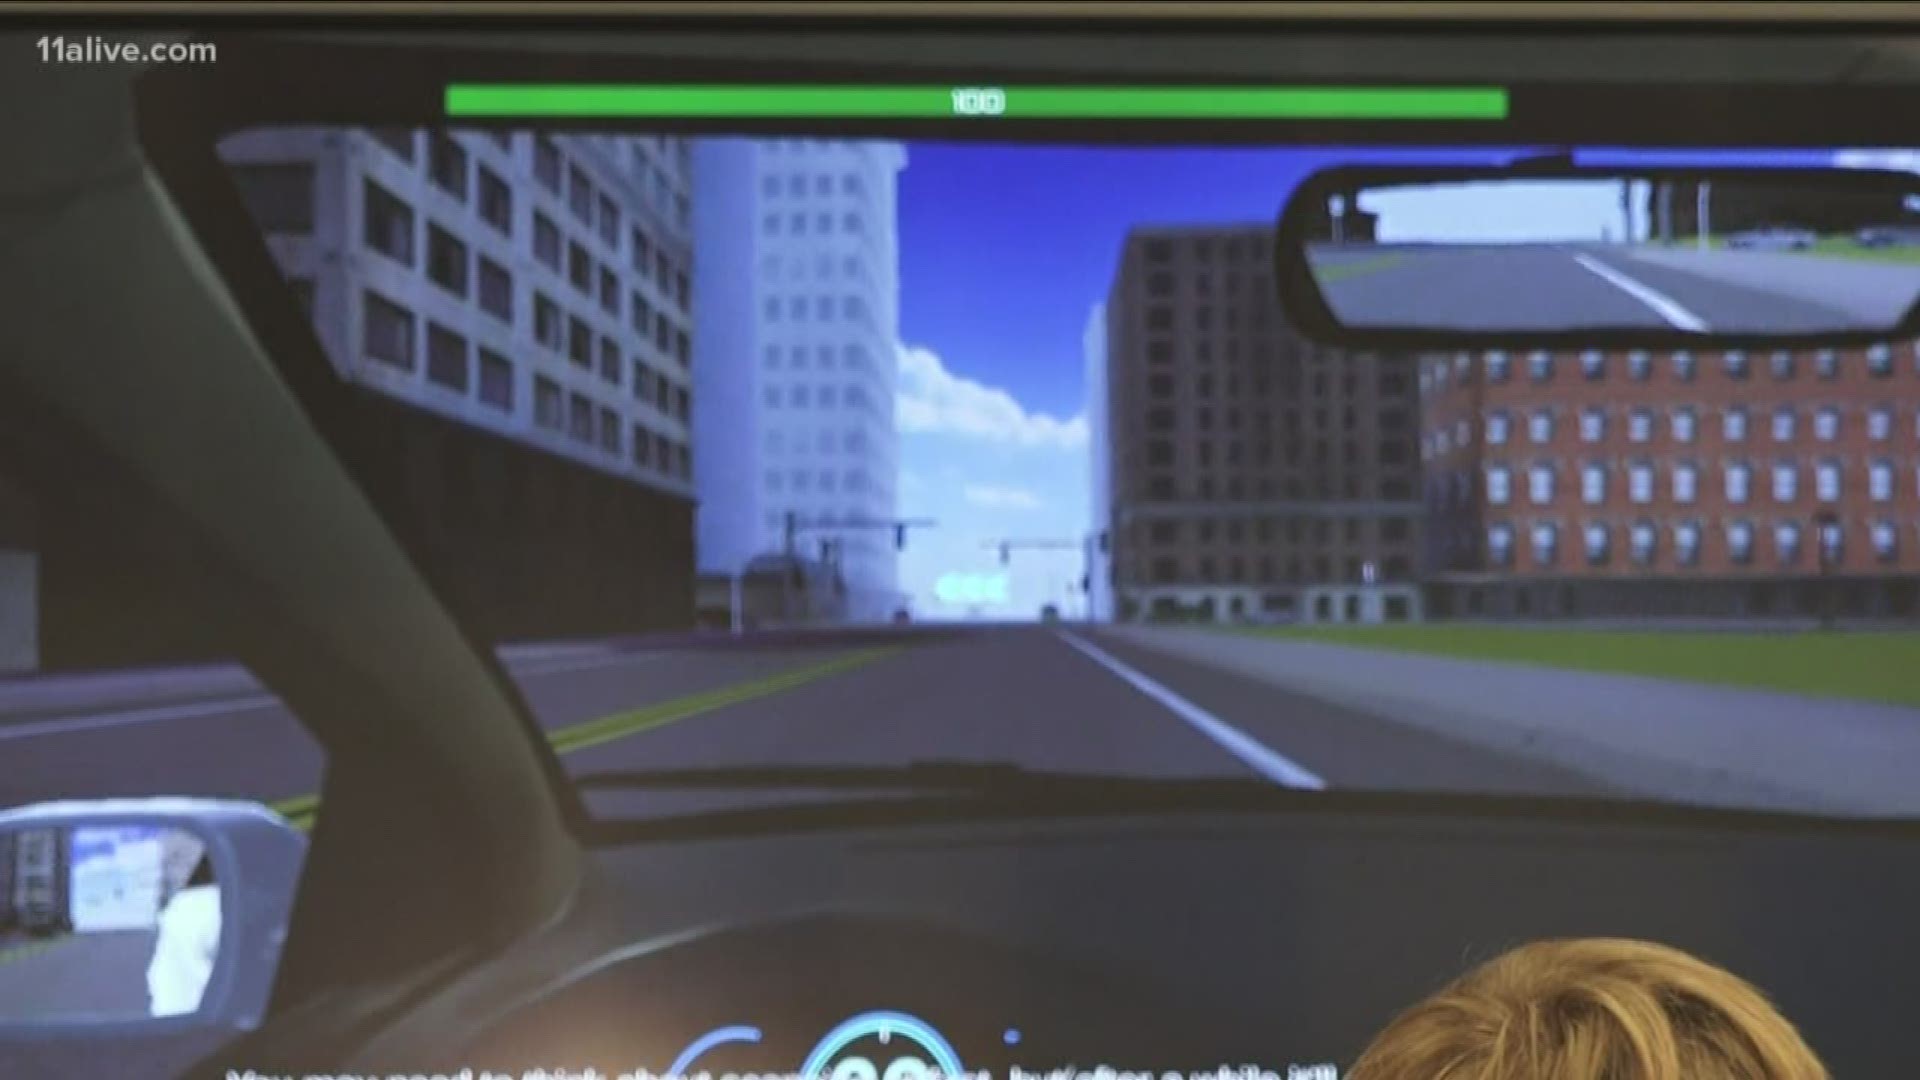 To make drivers ed software accessible to more students, a company created a driving simulator video game, available for download on Xbox and PlayStation 4 systems.